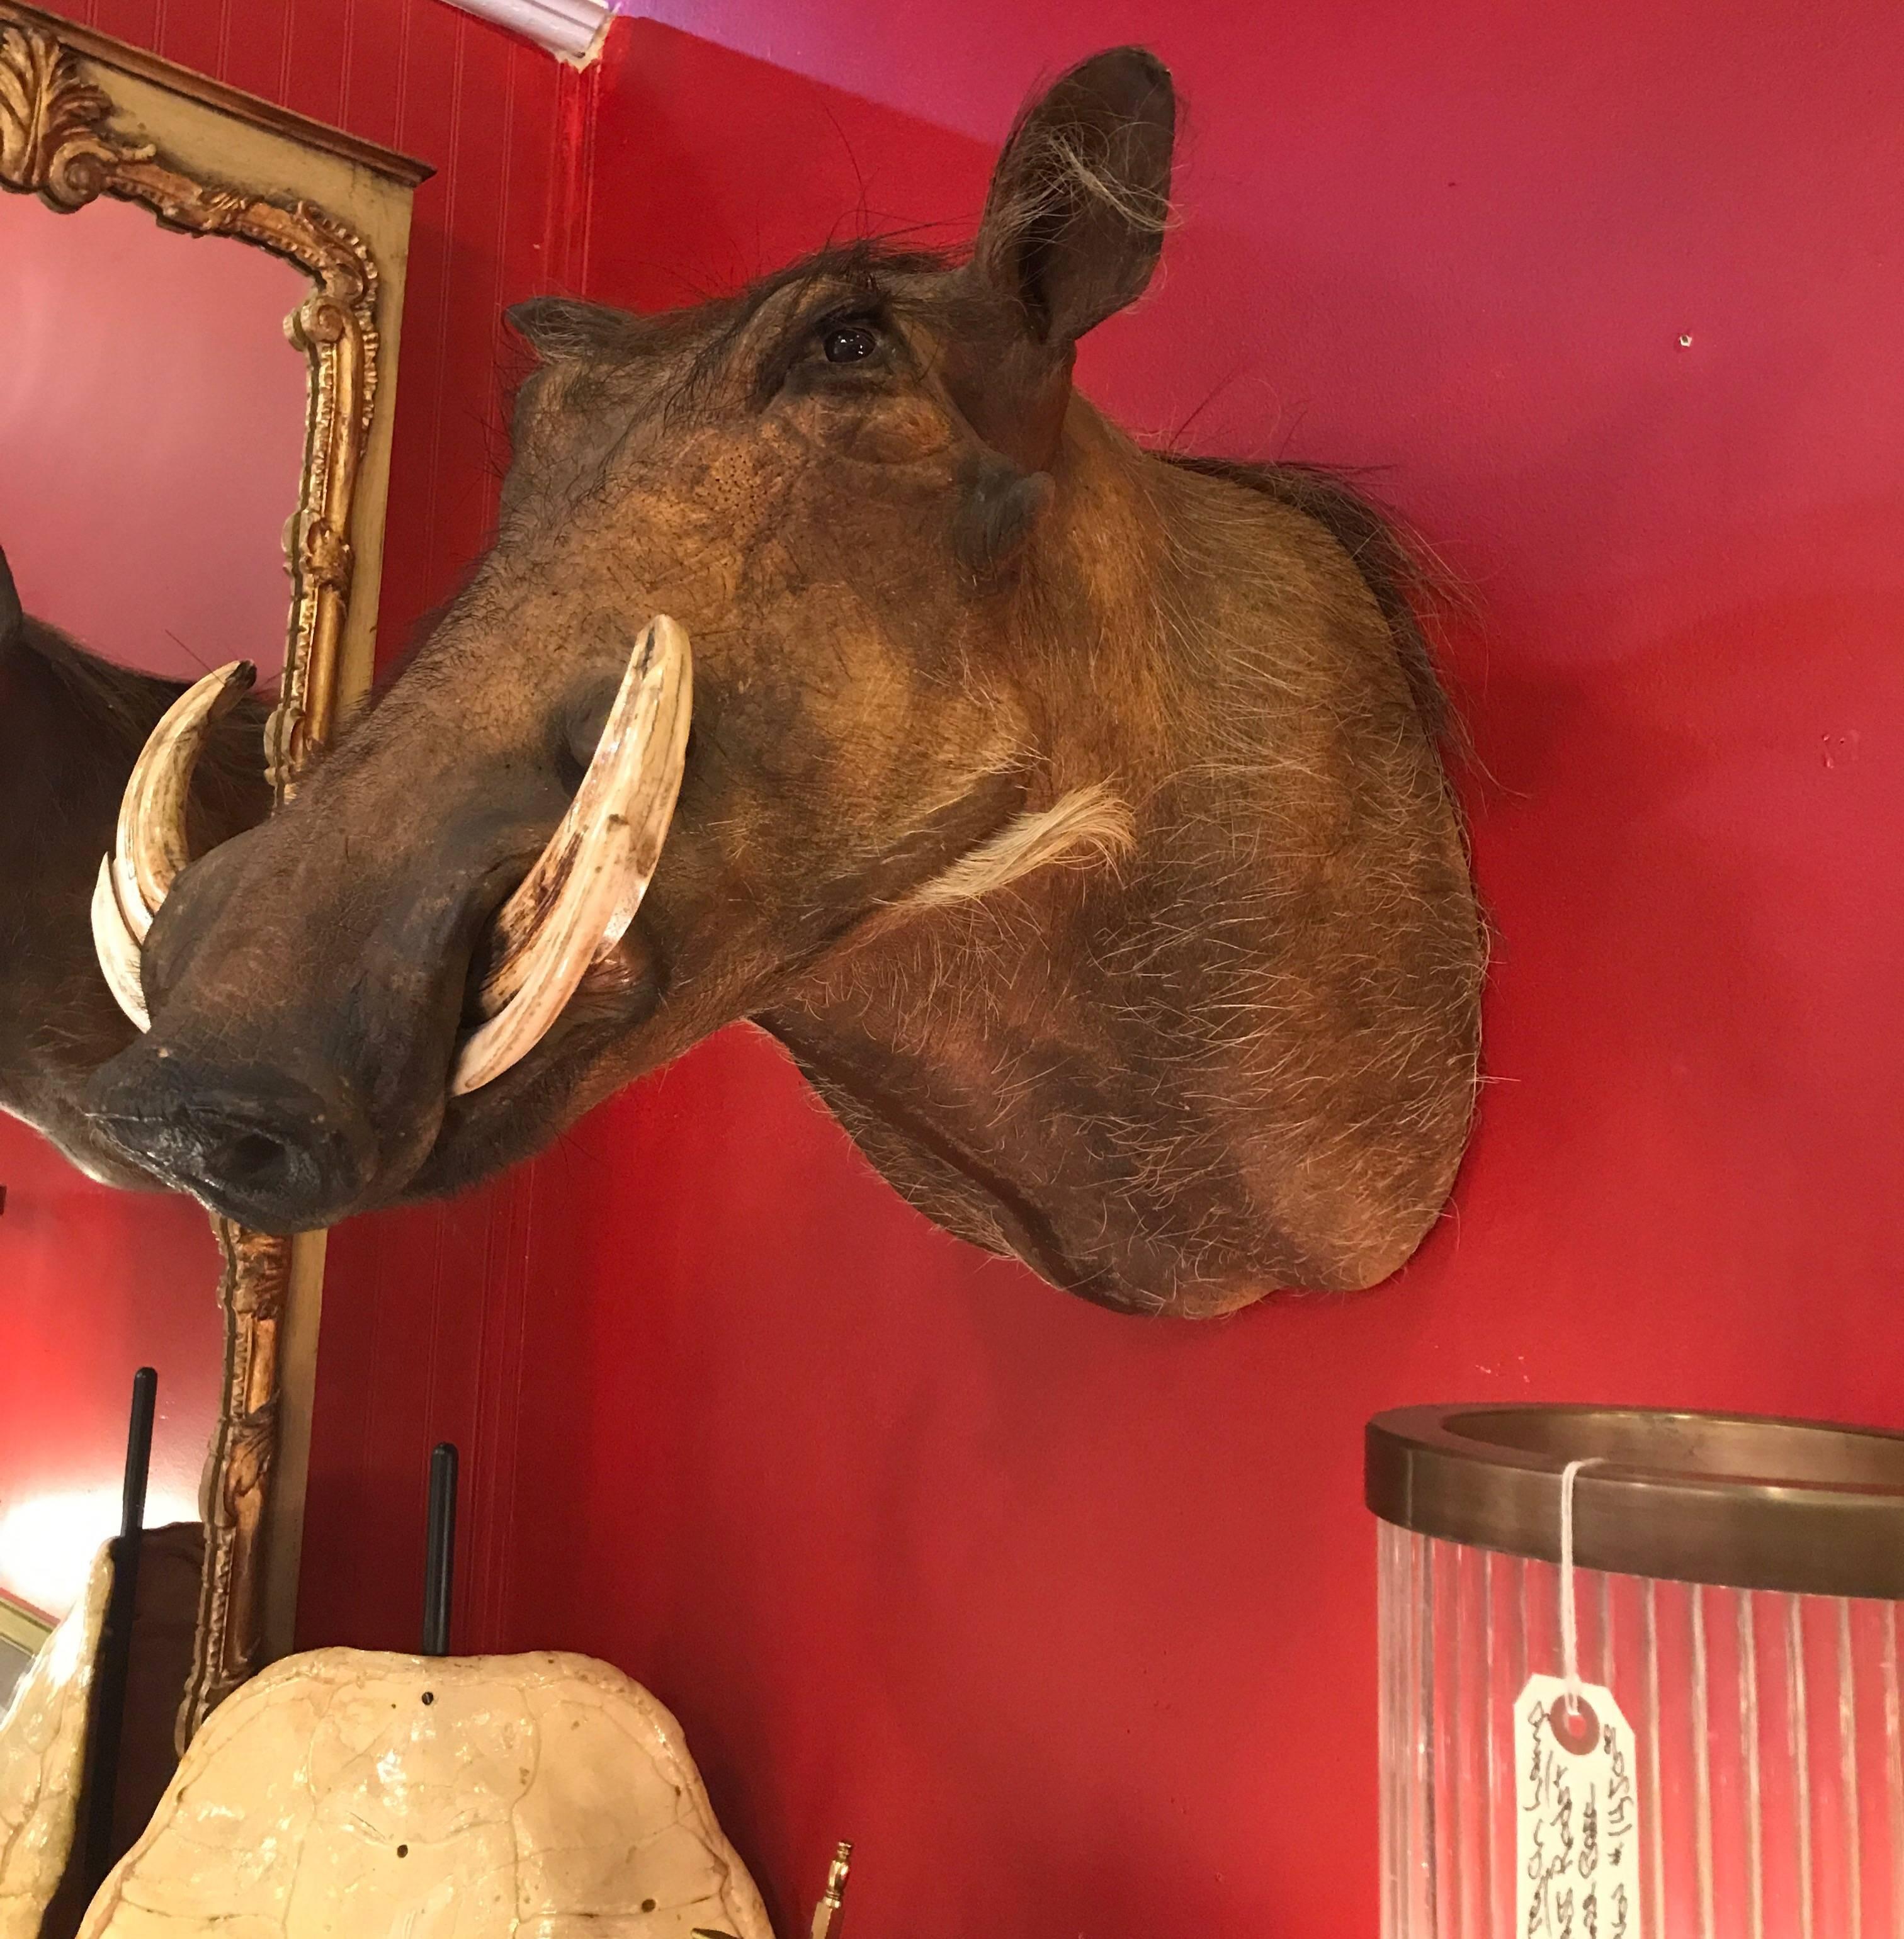 A taxidermy trophy of a Boars head. this wall hanging trophy is high quality and shows expert taxidermy skills.